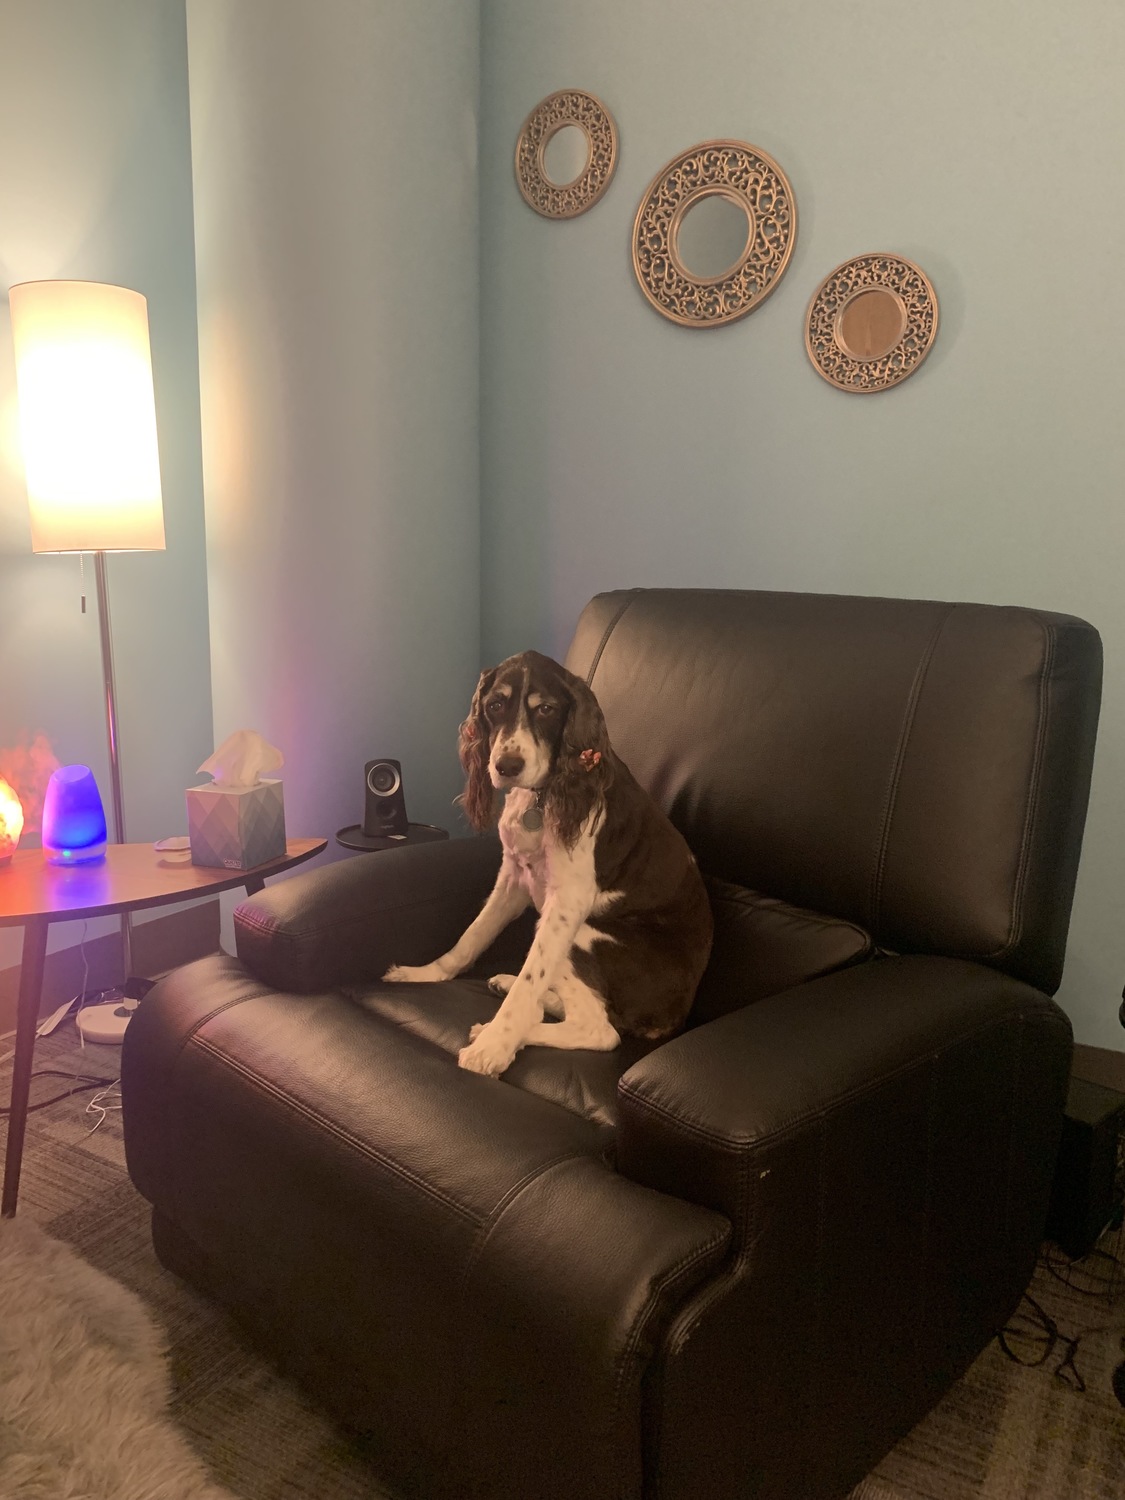 Gallery Photo of Ettalew our clinic therapy dog chilling in a psychotherapy room.